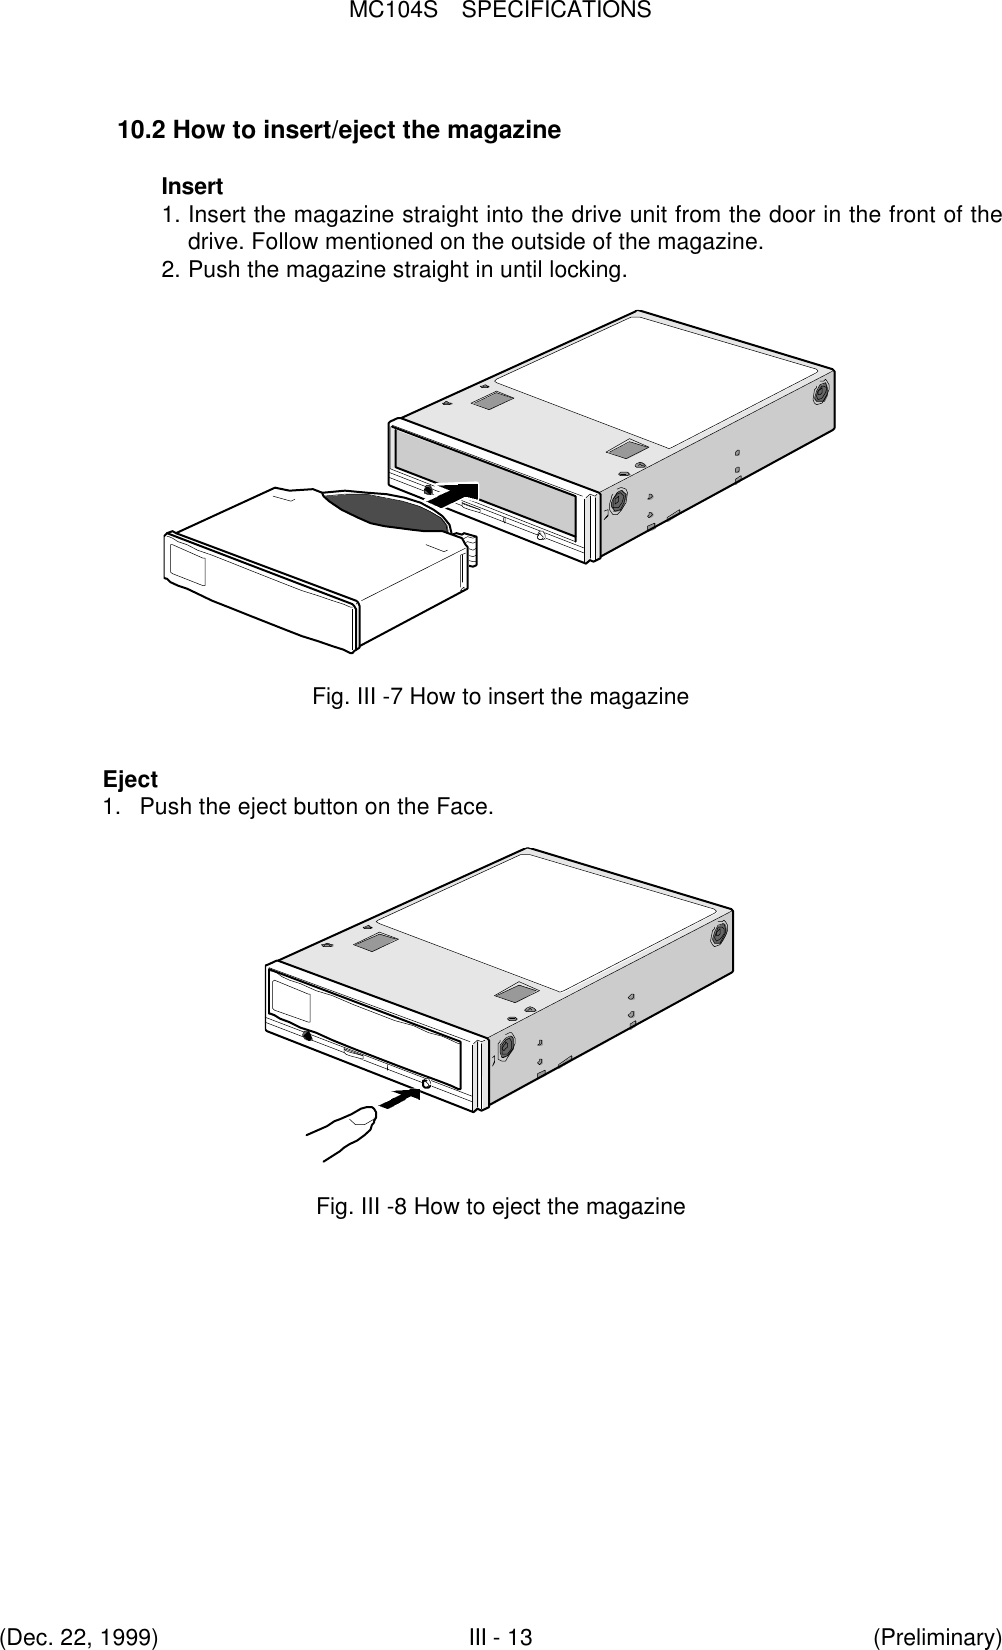 MC104S  SPECIFICATIONS(Dec. 22, 1999)III - 13 (Preliminary)10.2 How to insert/eject the magazineInsert1. Insert the magazine straight into the drive unit from the door in the front of thedrive. Follow mentioned on the outside of the magazine.2. Push the magazine straight in until locking.Fig. III -7 How to insert the magazineEject1. Push the eject button on the Face.Fig. III -8 How to eject the magazine